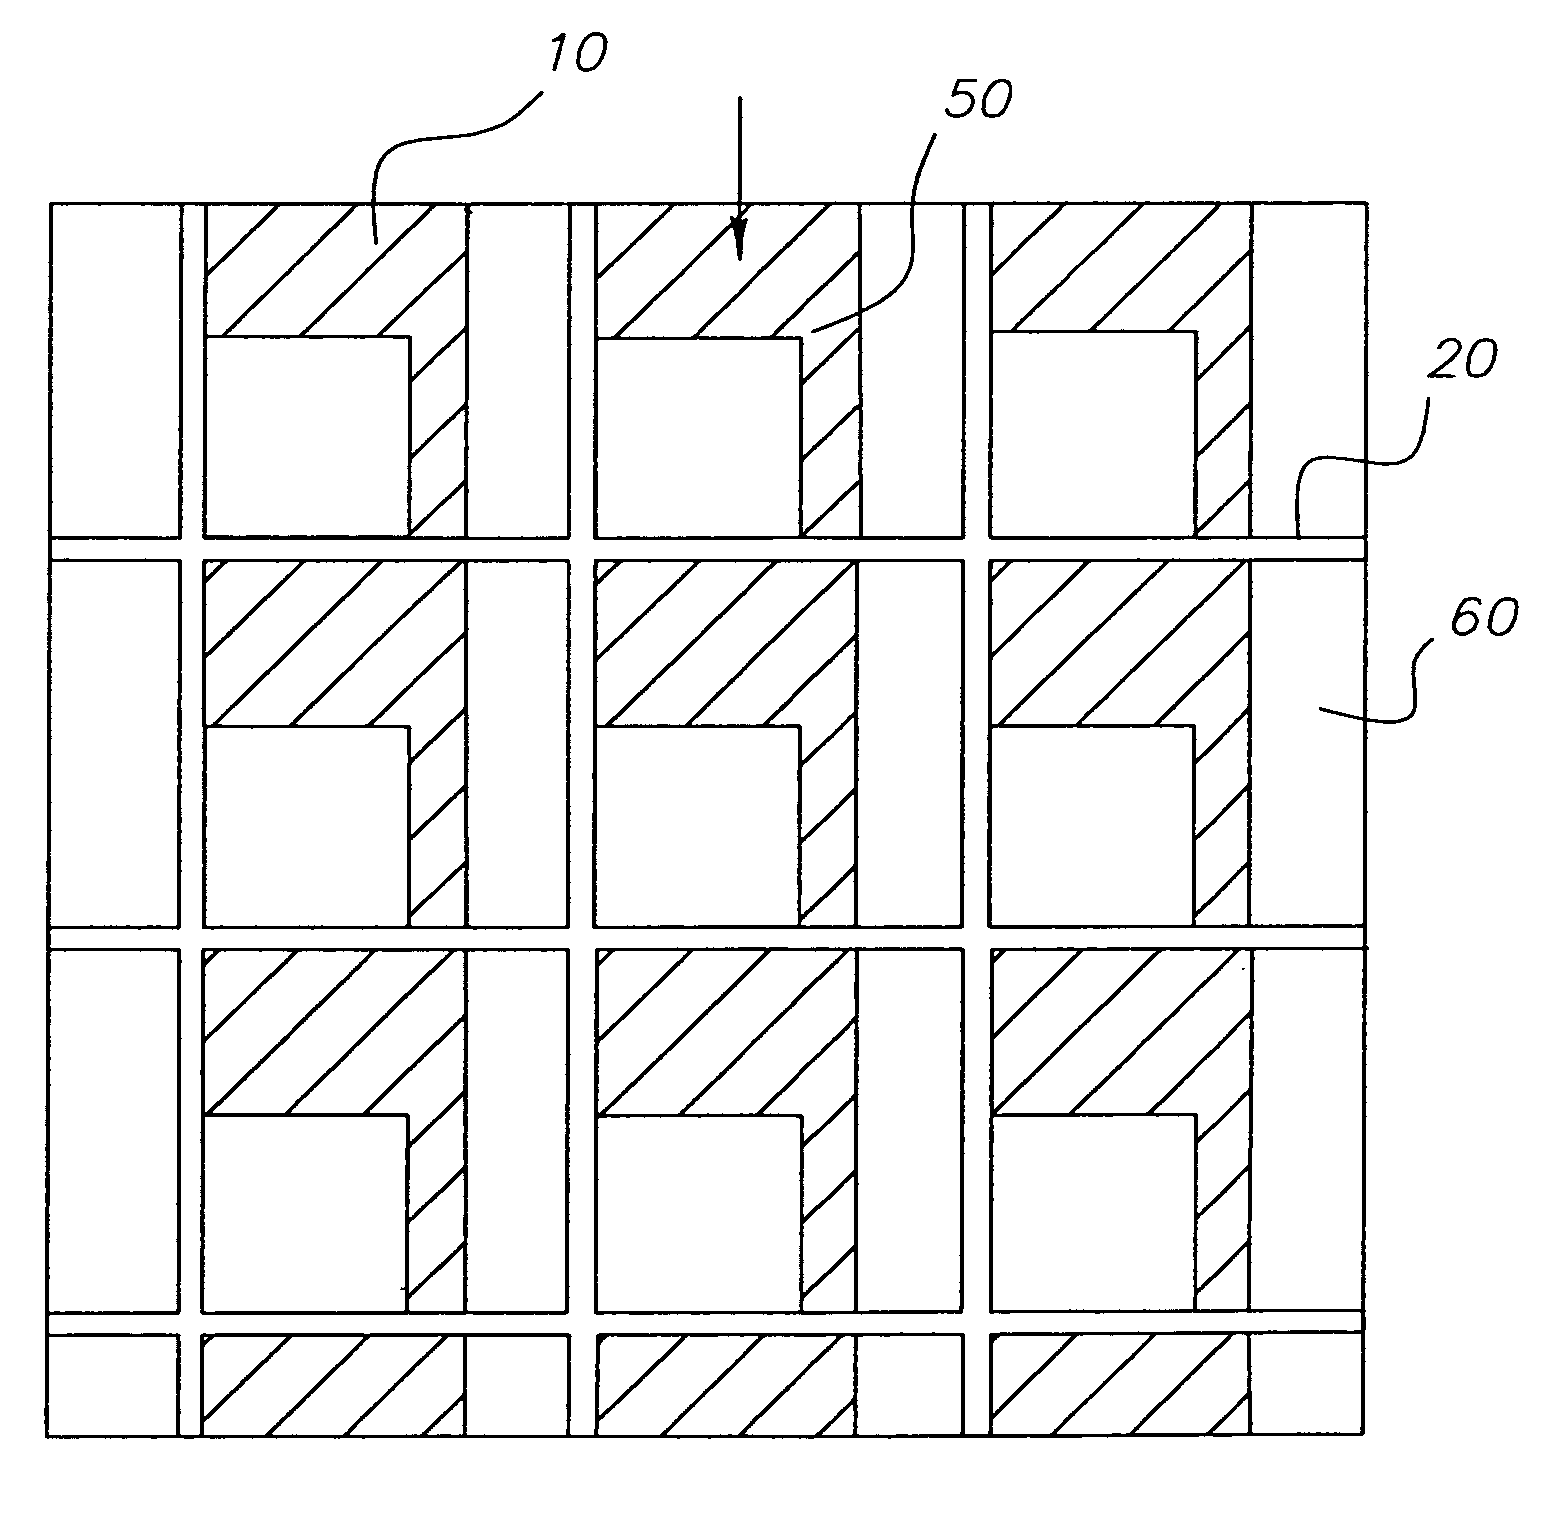 Display device with improved flexibility